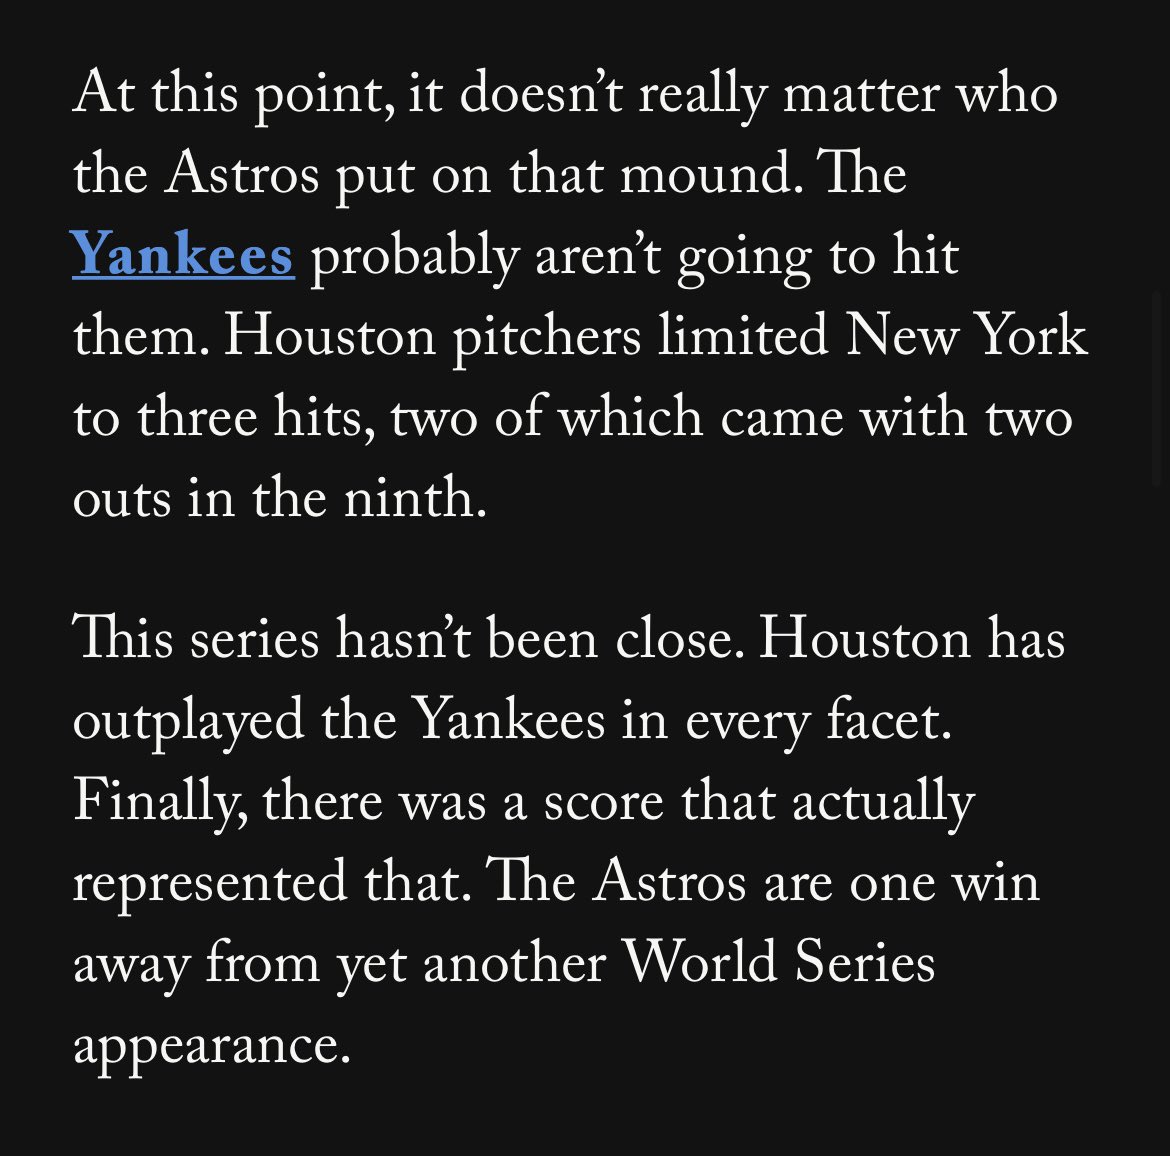 The Astros are a win away from the pennant. @SamBlum3 writes that the ALCS hasn’t been close. theathletic.com/3719878/2022/1…